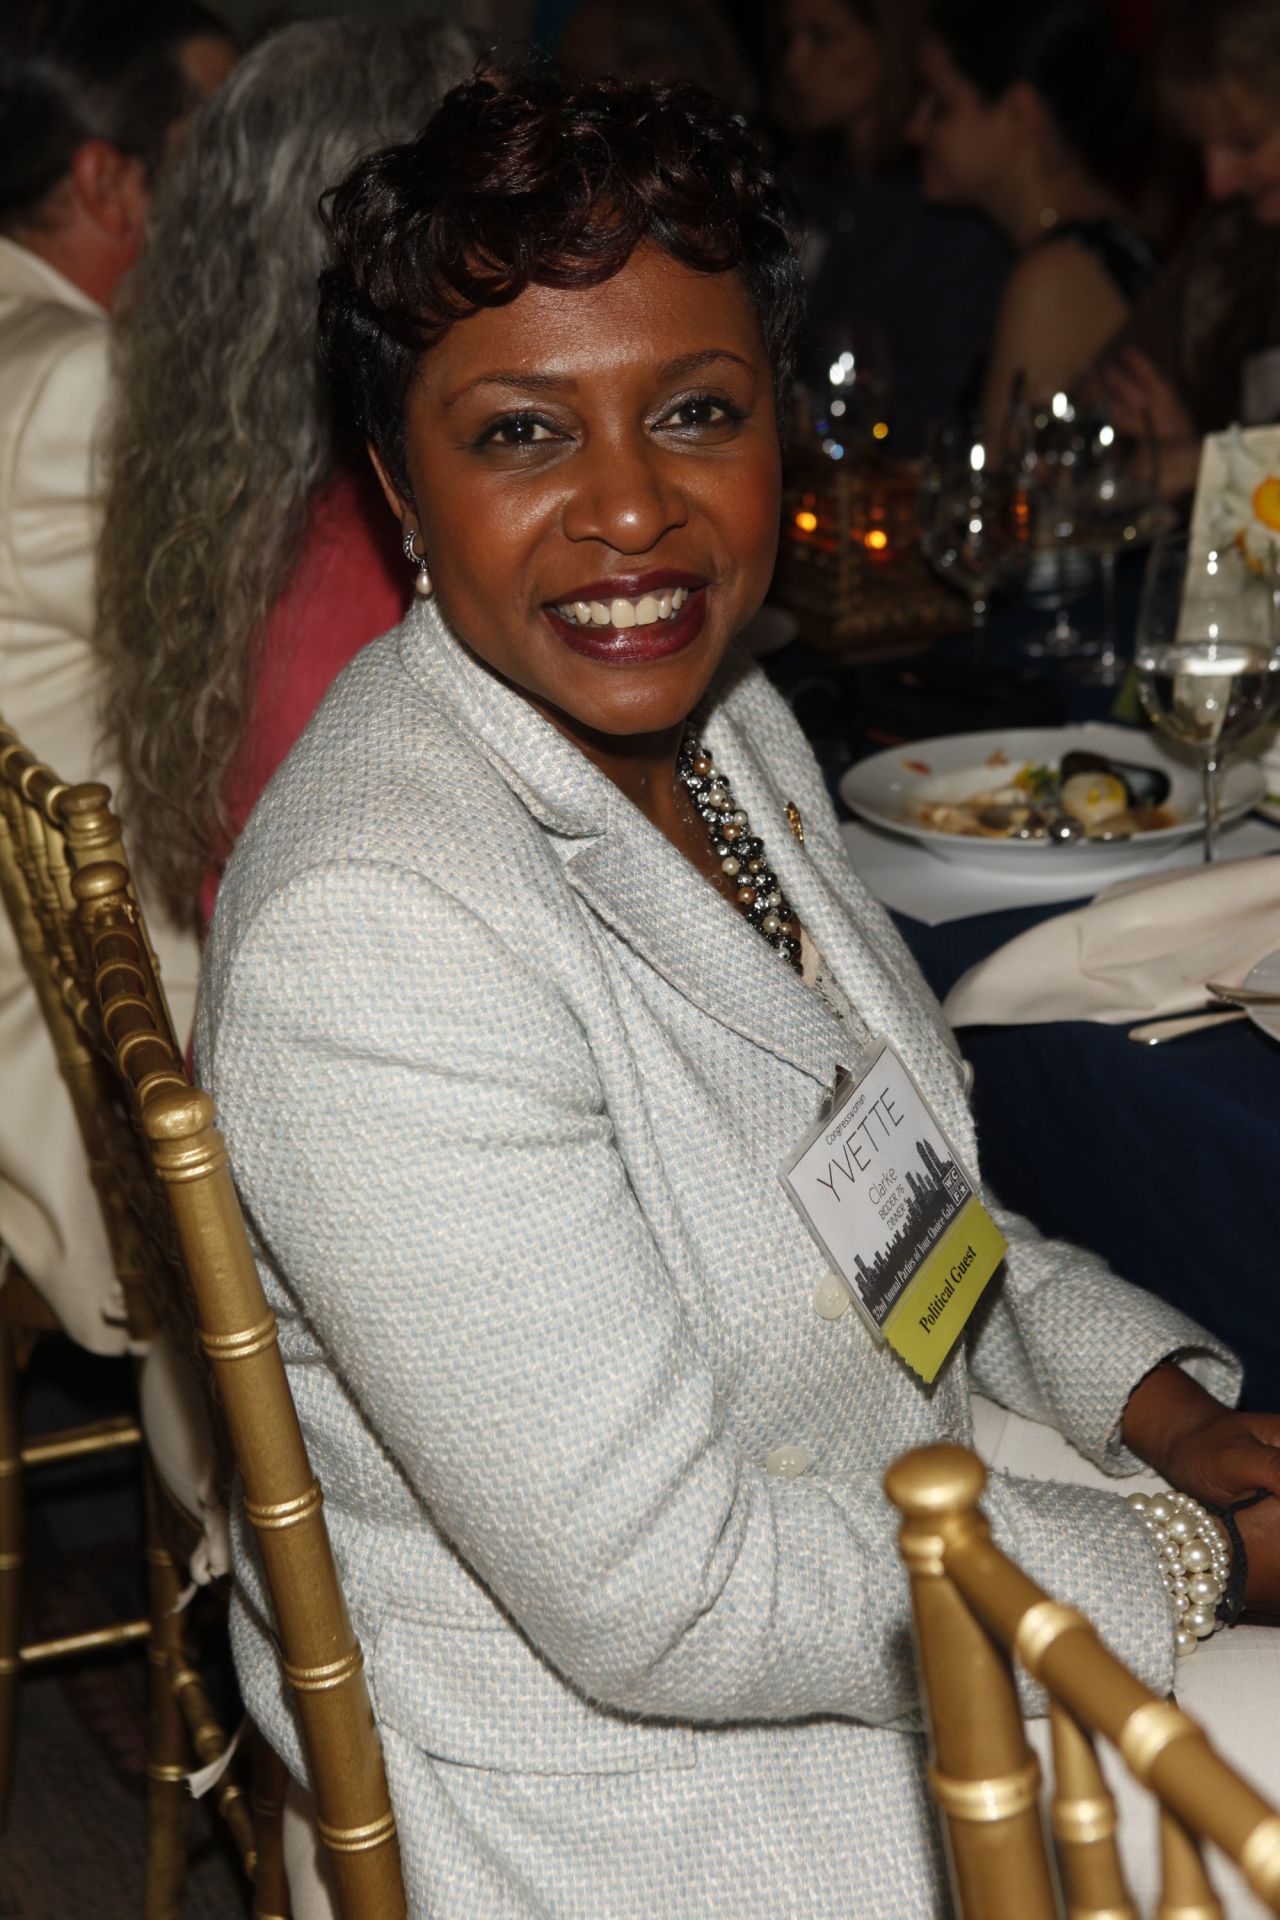 U.S. Rep. Yvette Clarke, D-New York, was born to Jamaican parents on November 21, 1964, in the Flatbush district of Brooklyn, which she now represents. Prior to being elected to the House, Clarke served on the New York City Council after succeeding her mother, Una Clarke, making them the first mother-daughter succession in the council's history.